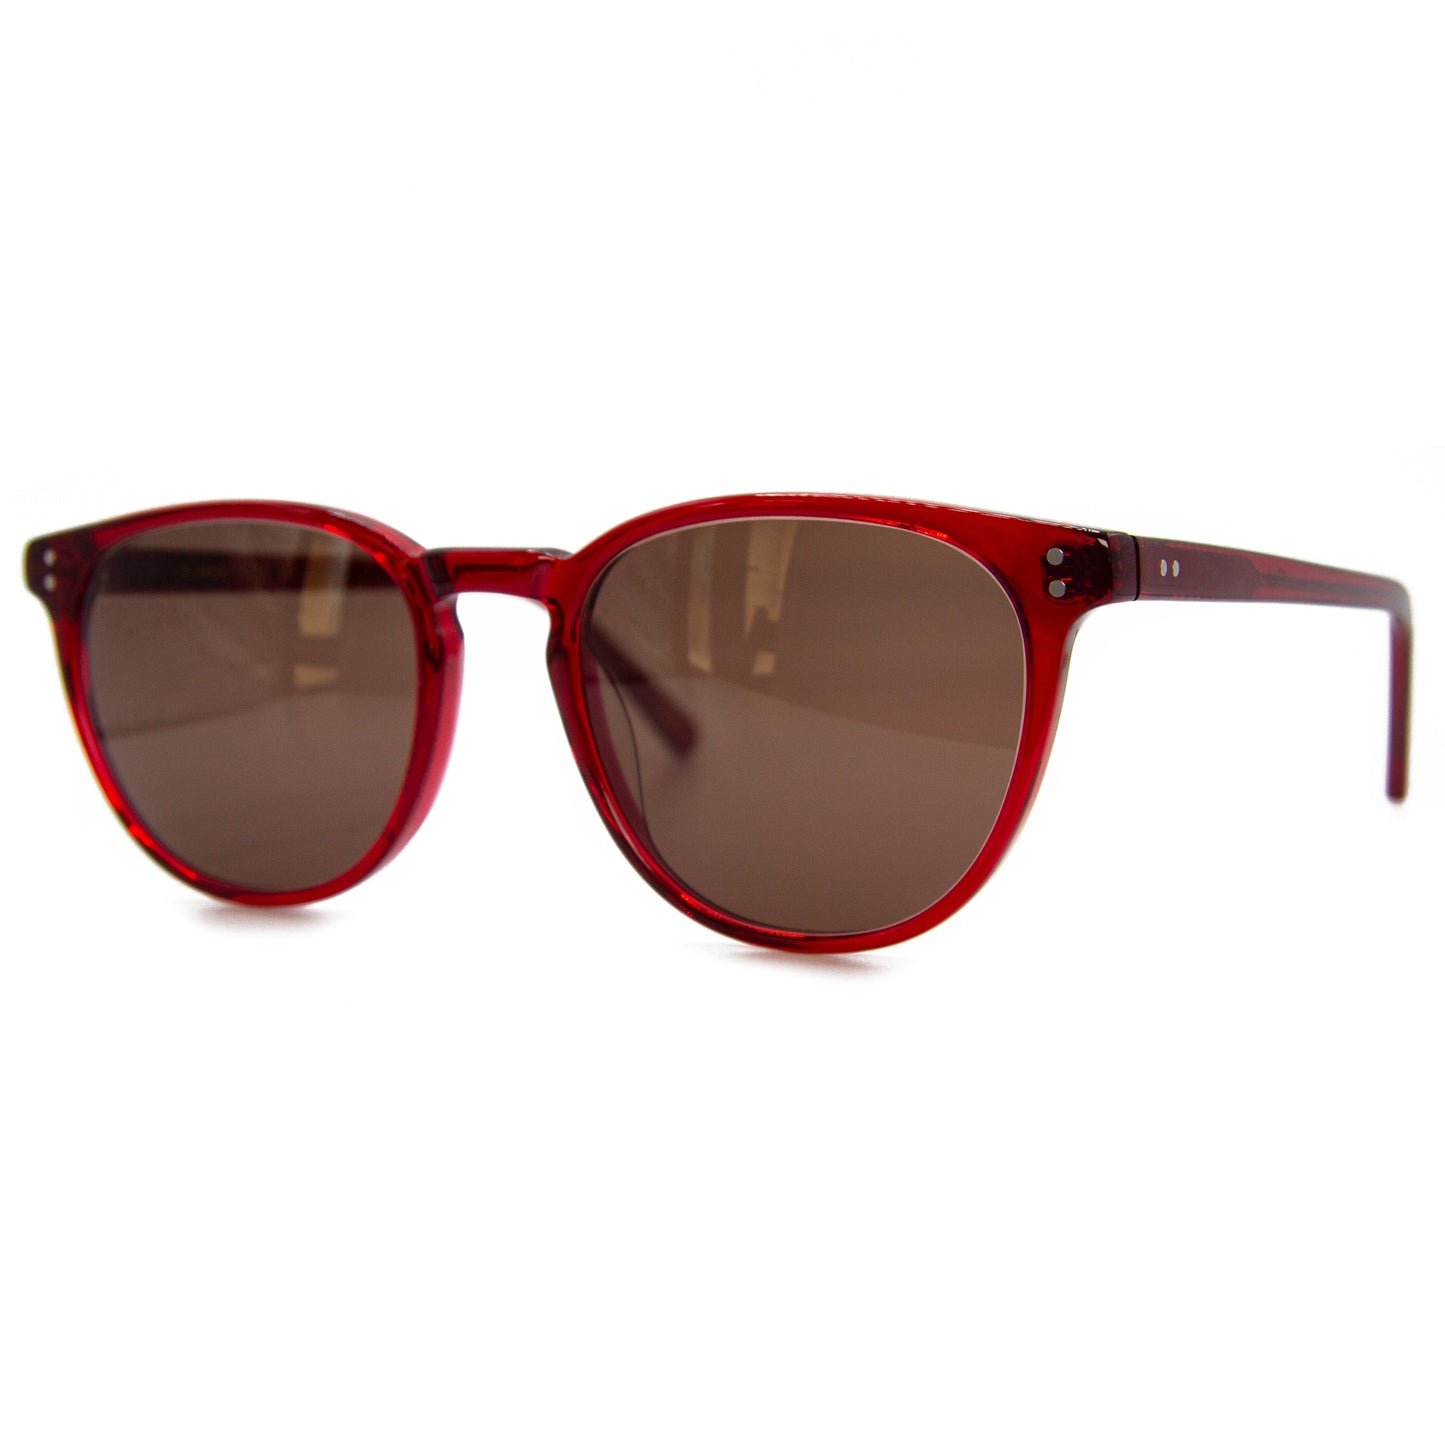 3 brothers - Ant - Red - Prescription Sunglasses - Side